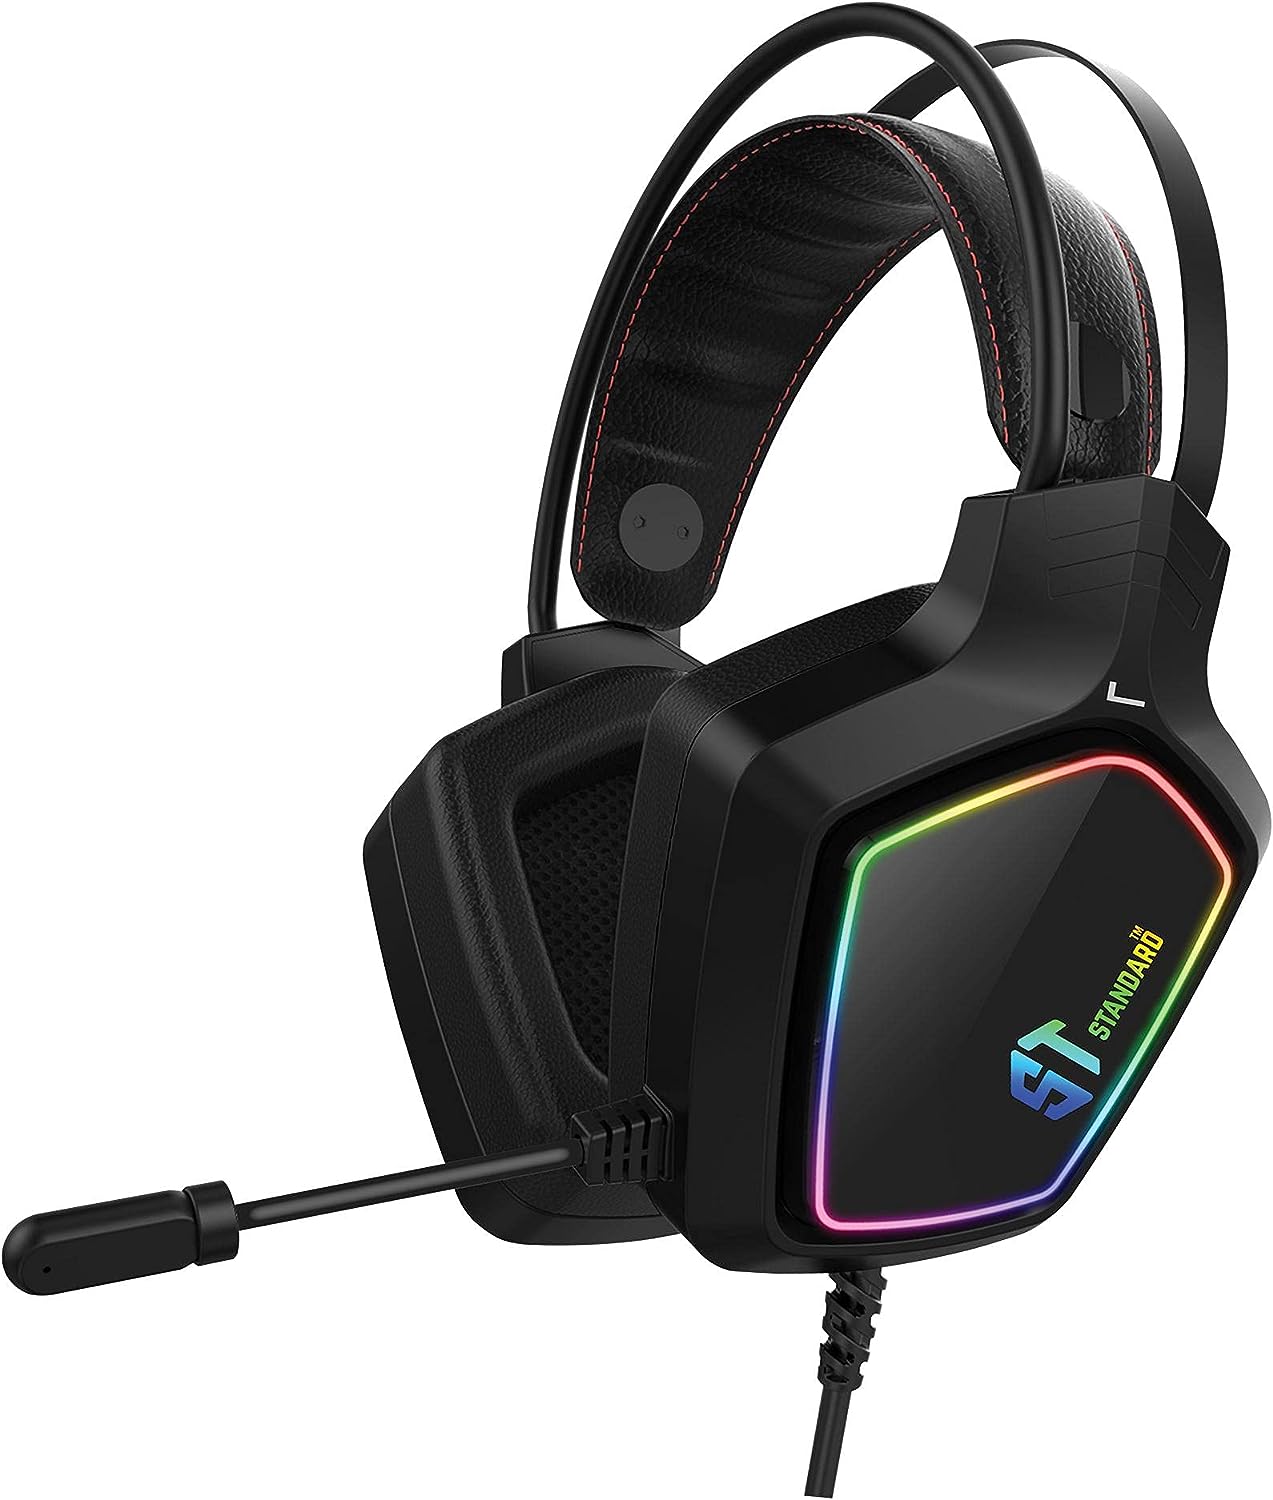 Standard Wired Over Ear Gaming Headphones with Microphone, Black - GM08